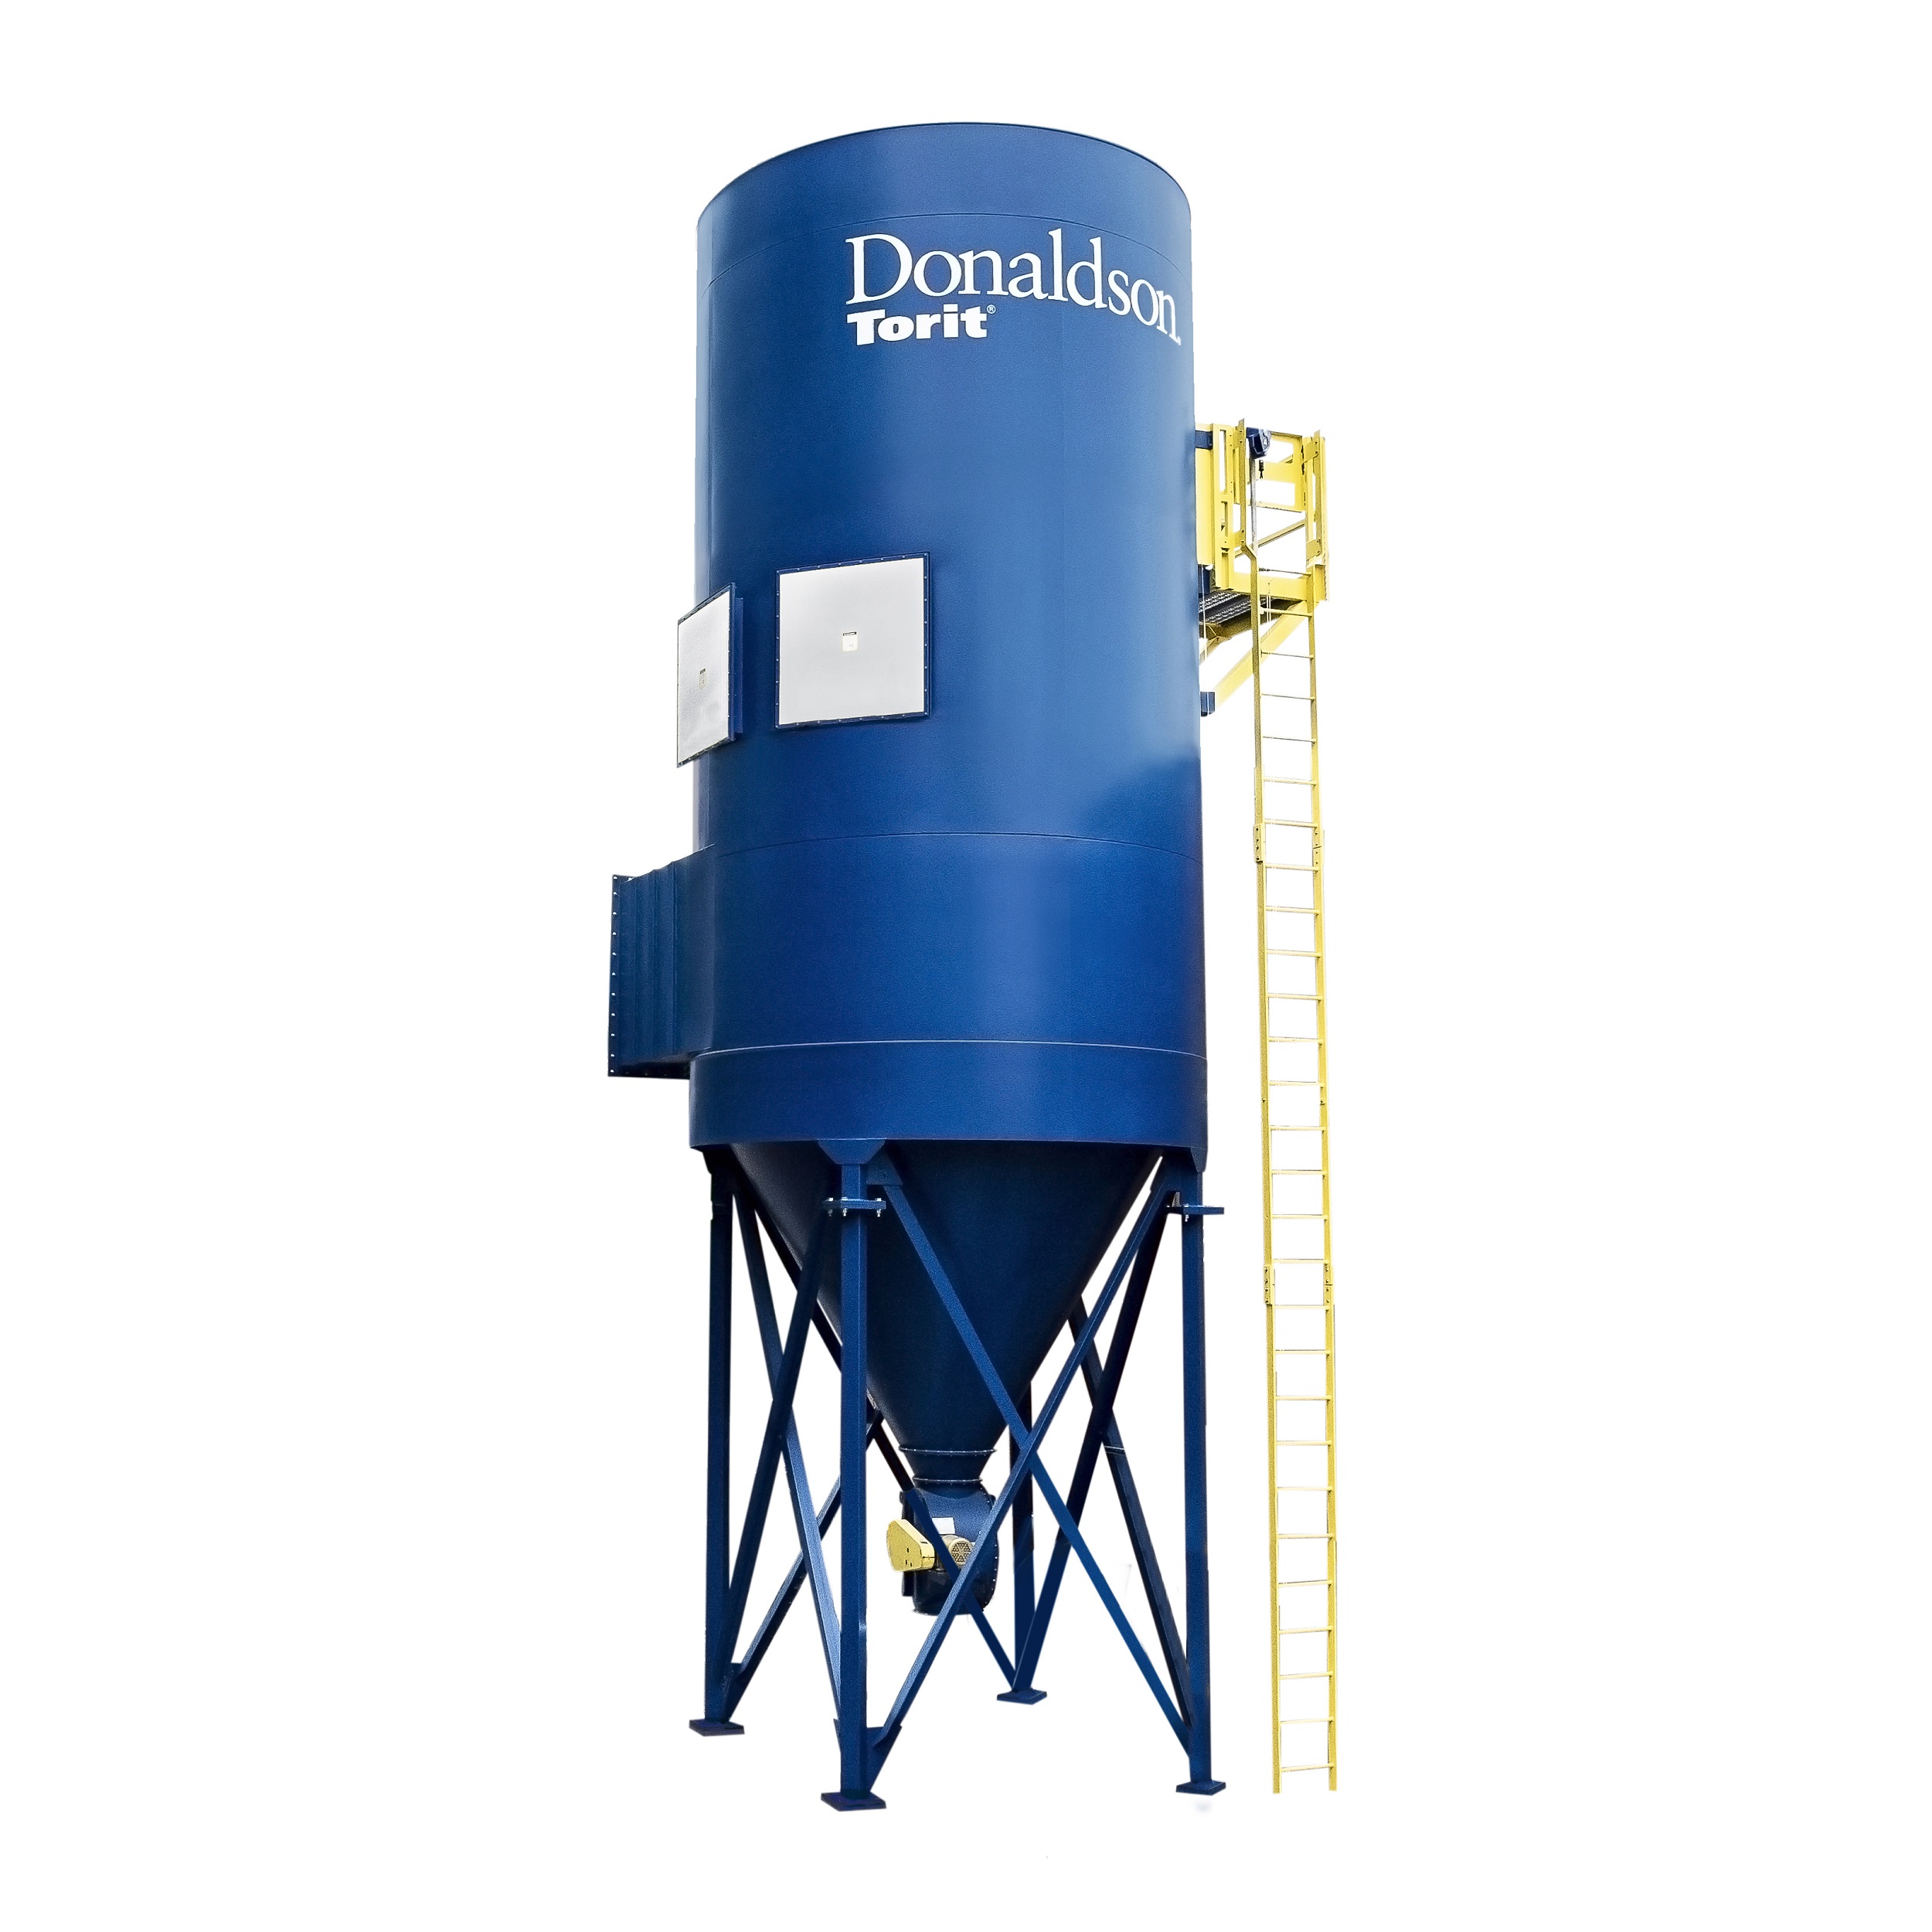 The RP baghouse collector features Donaldson’s SuperSep inlet which pre-separates up to 97% of the dust before it reaches the filters.